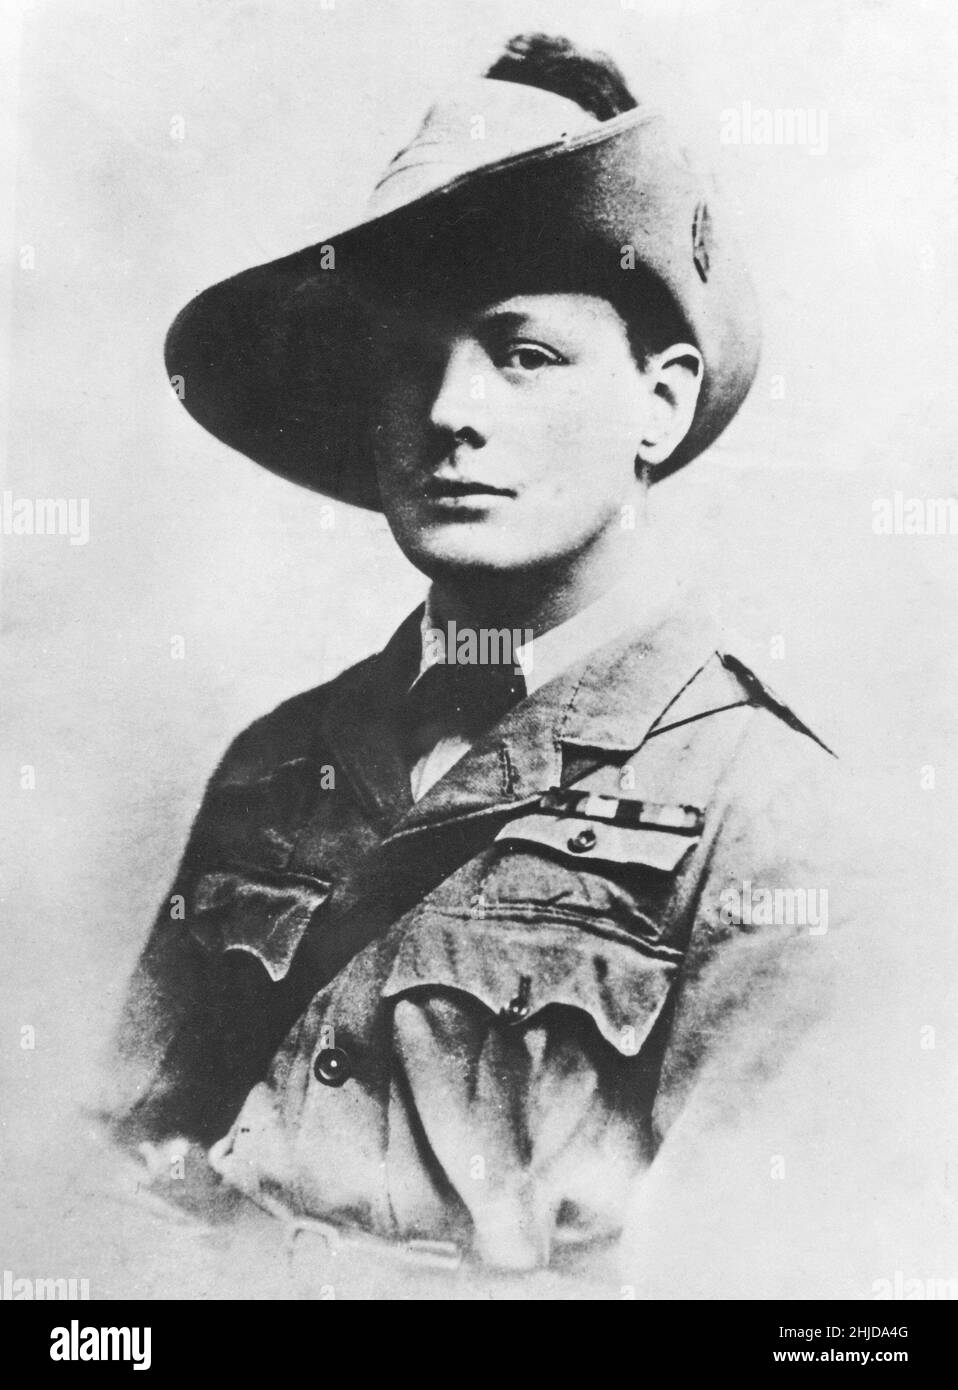 Winston Churchill. British statesman who served as Prime minister of the United Kingdom from 1940 to 1945 during the Second world war. Born on november 30 1874, dead january 24 1965. Pictured as a young officer in the late 19th century during the Boer war. Stock Photo